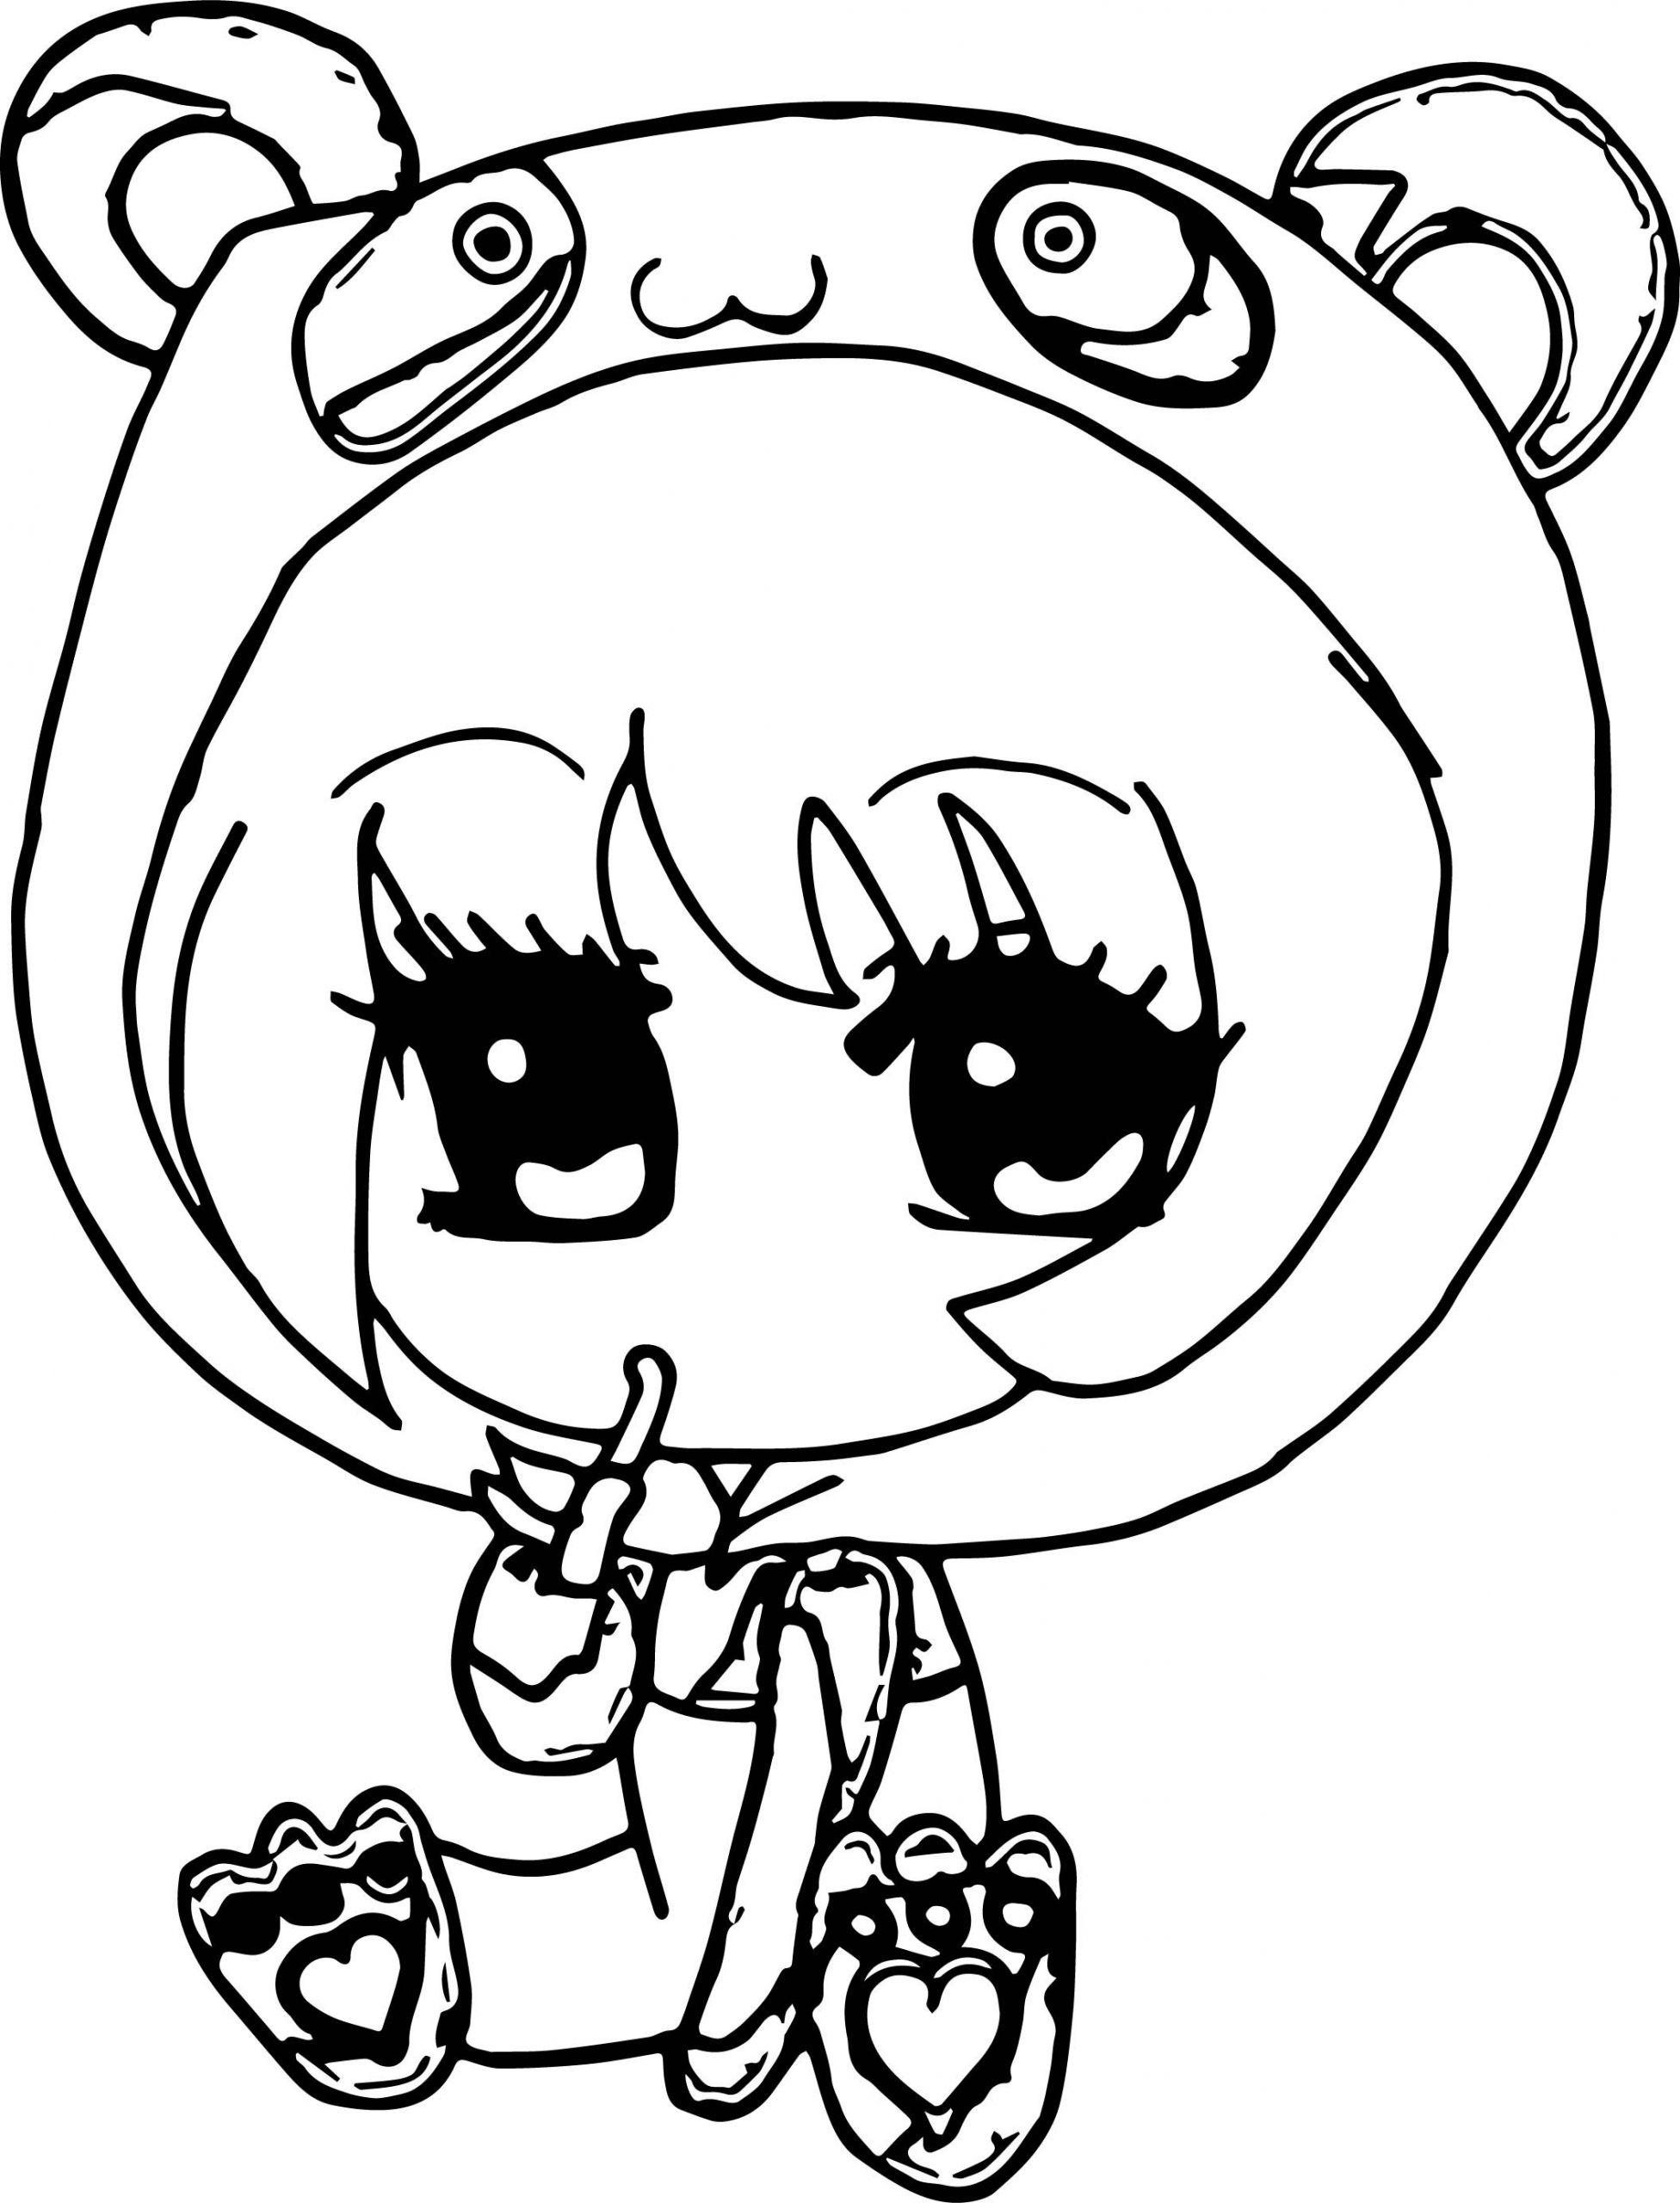 Chibi Girls Coloring Pages
 Anime Chibi Girl Coloring Pages